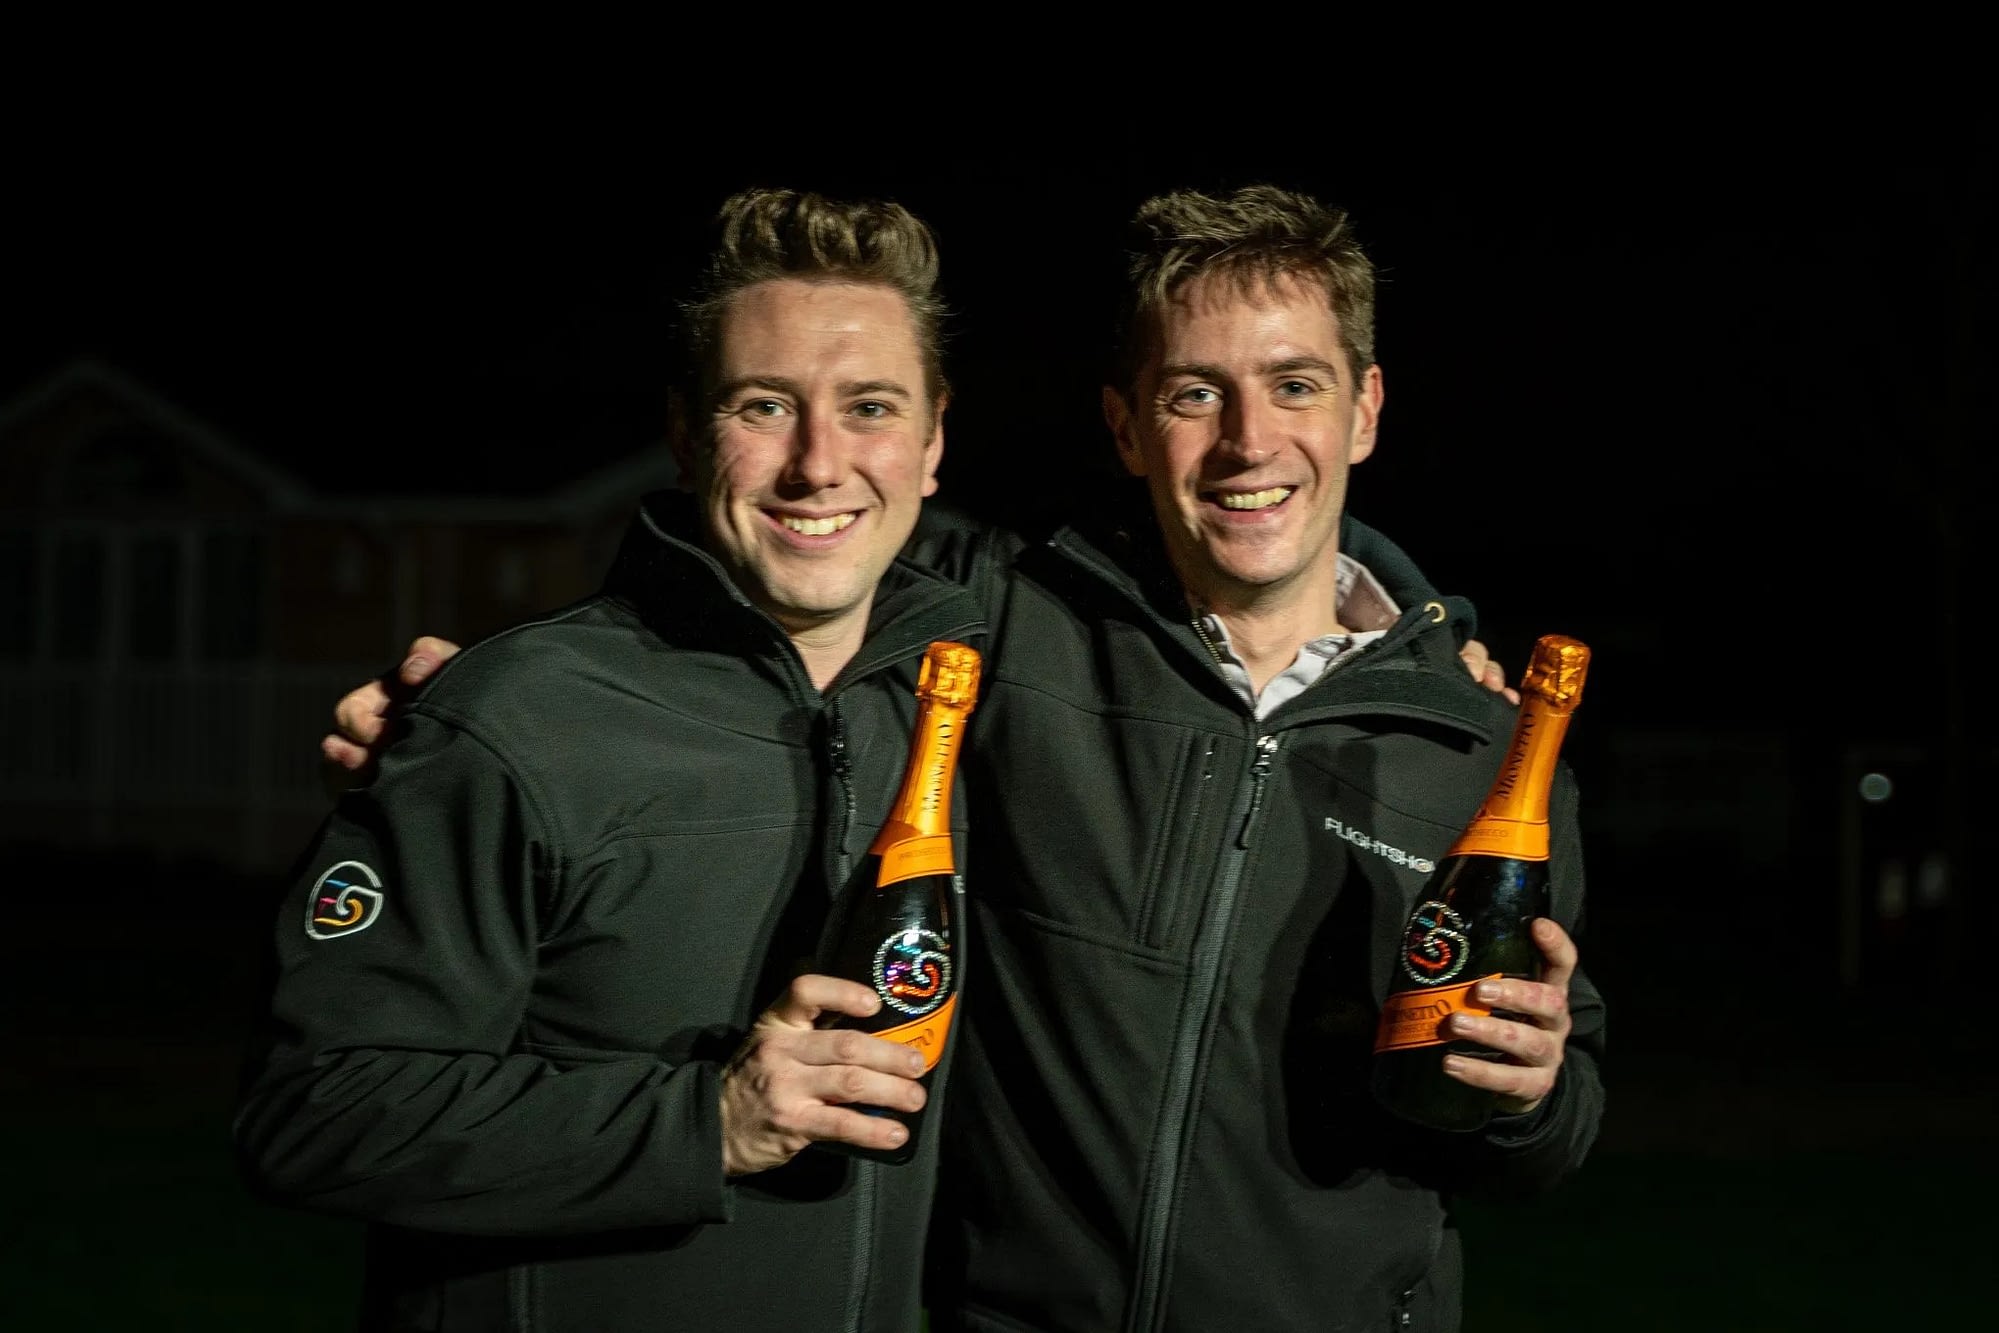 Eoin & George, FlightShows Directors celebrating after a successful drone show